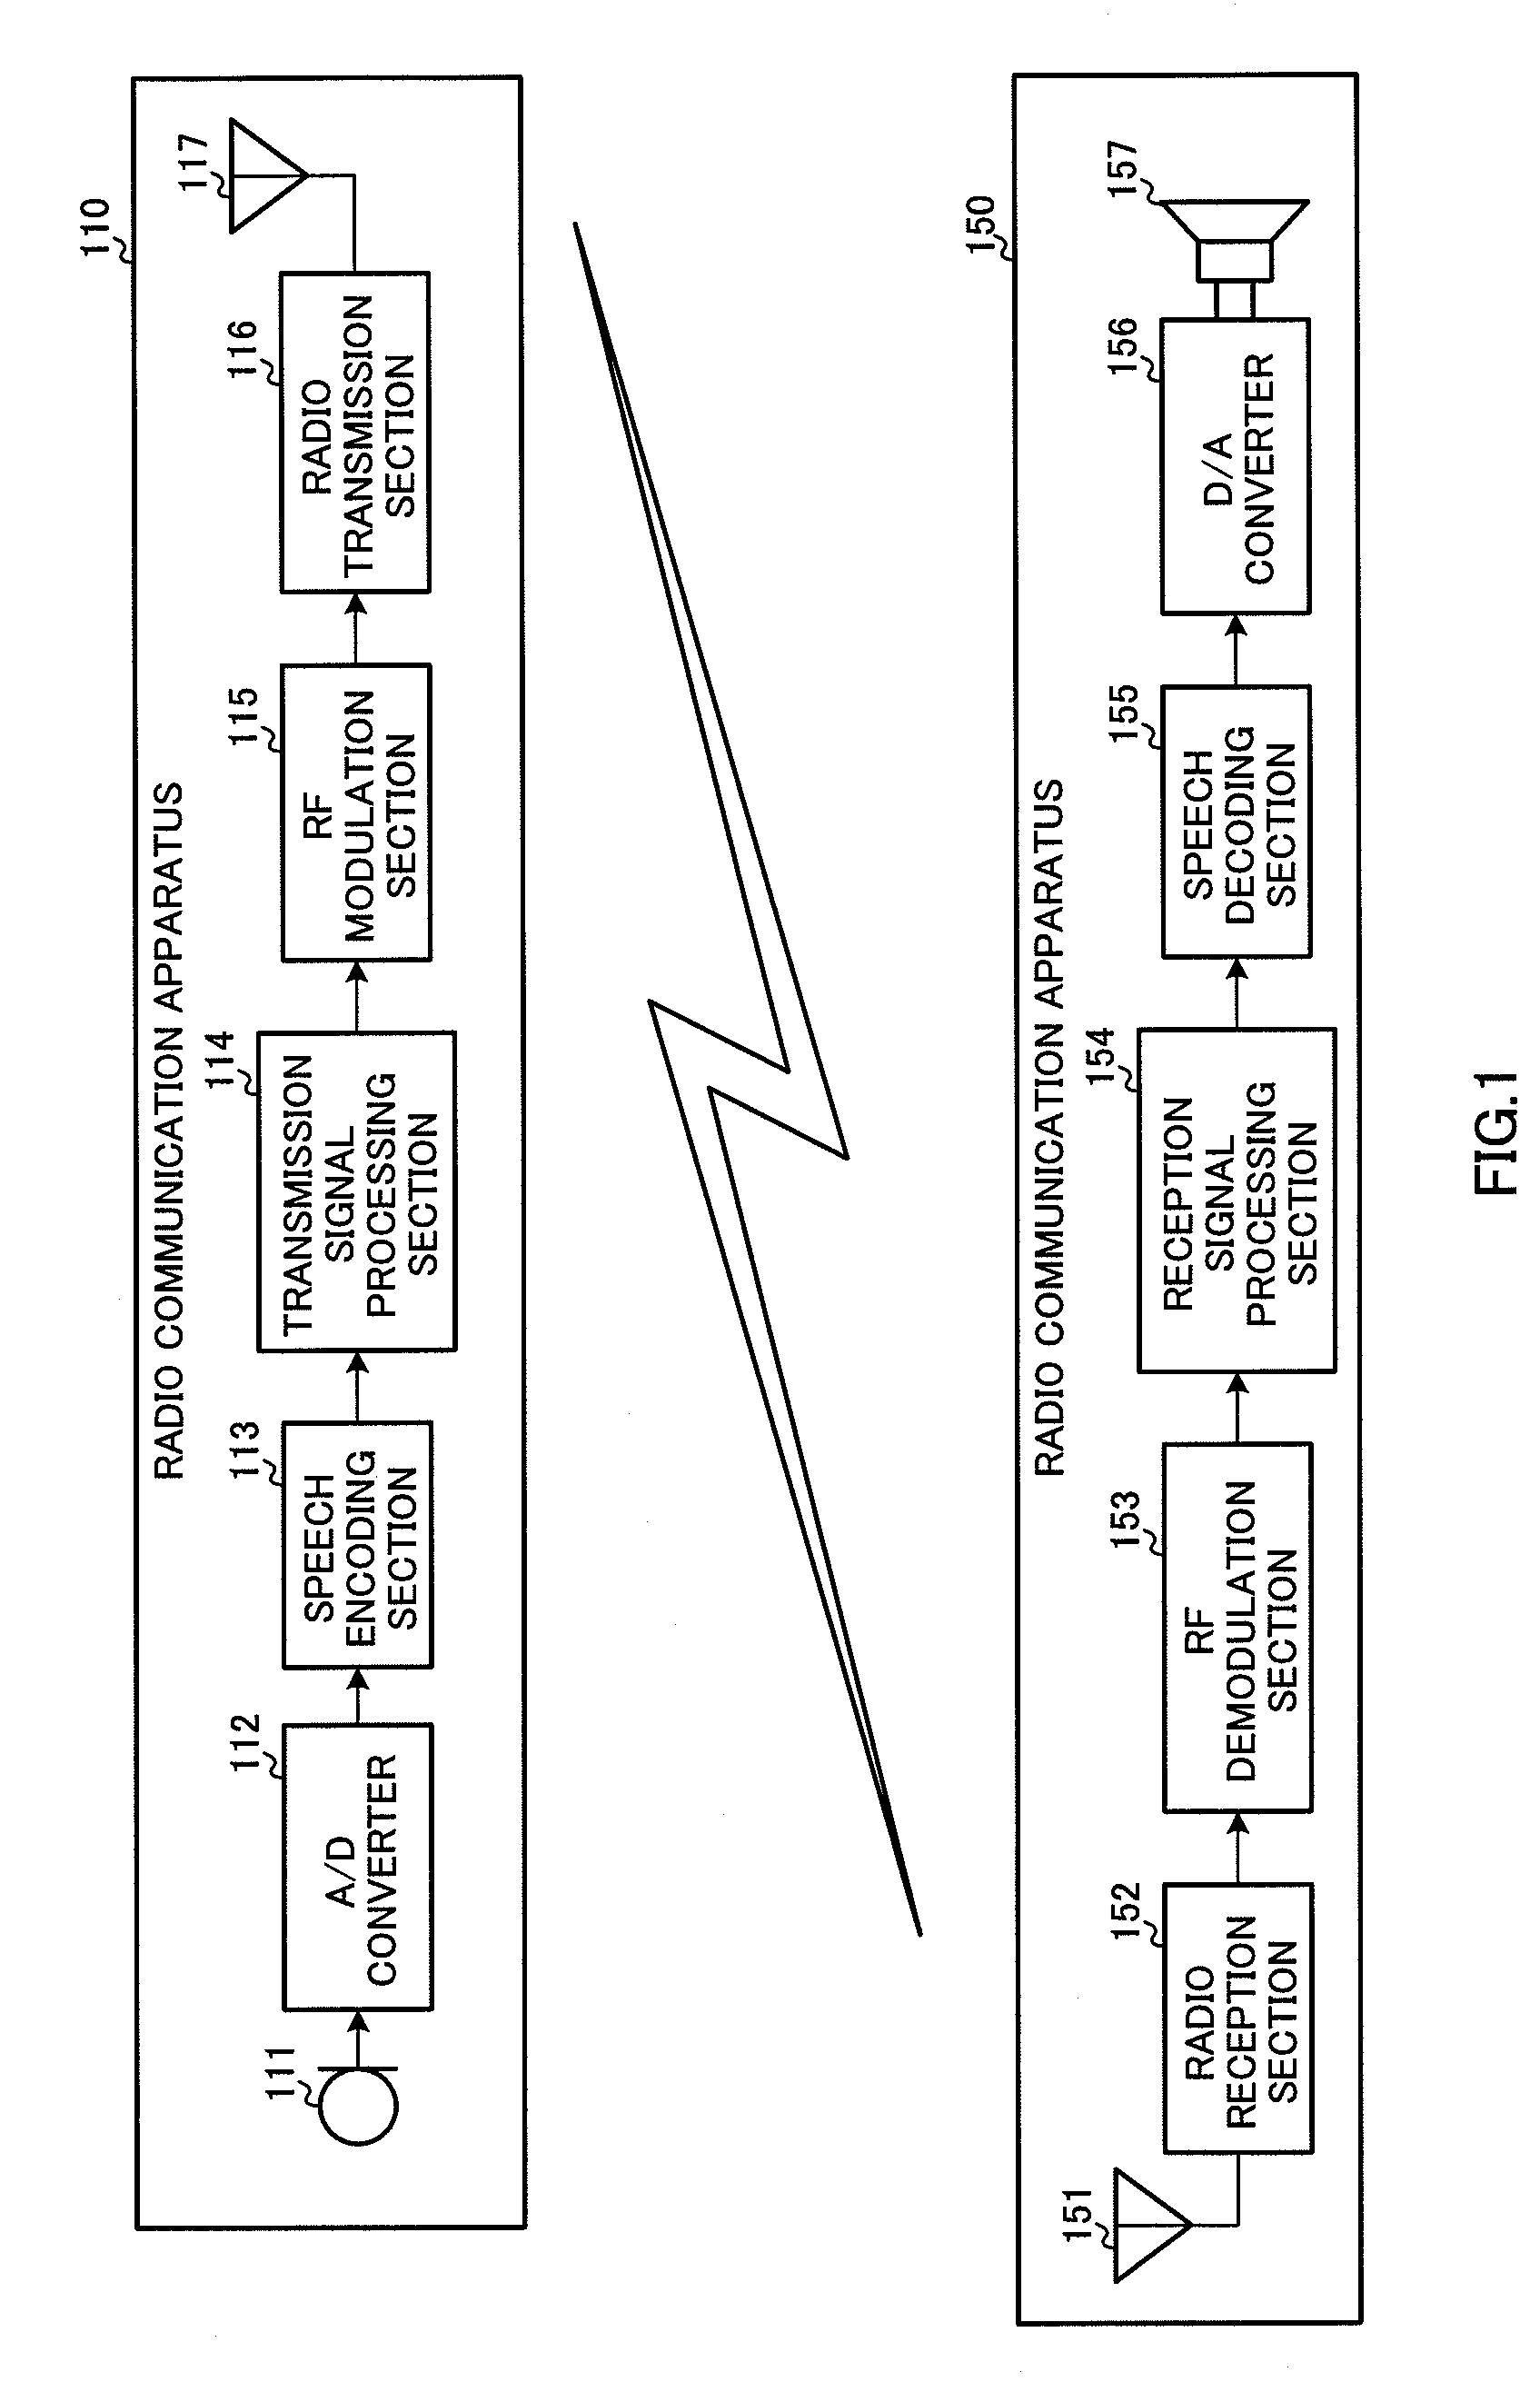 Low-frequency-band component and high-frequency-band audio encoding/decoding apparatus, and communication apparatus thereof